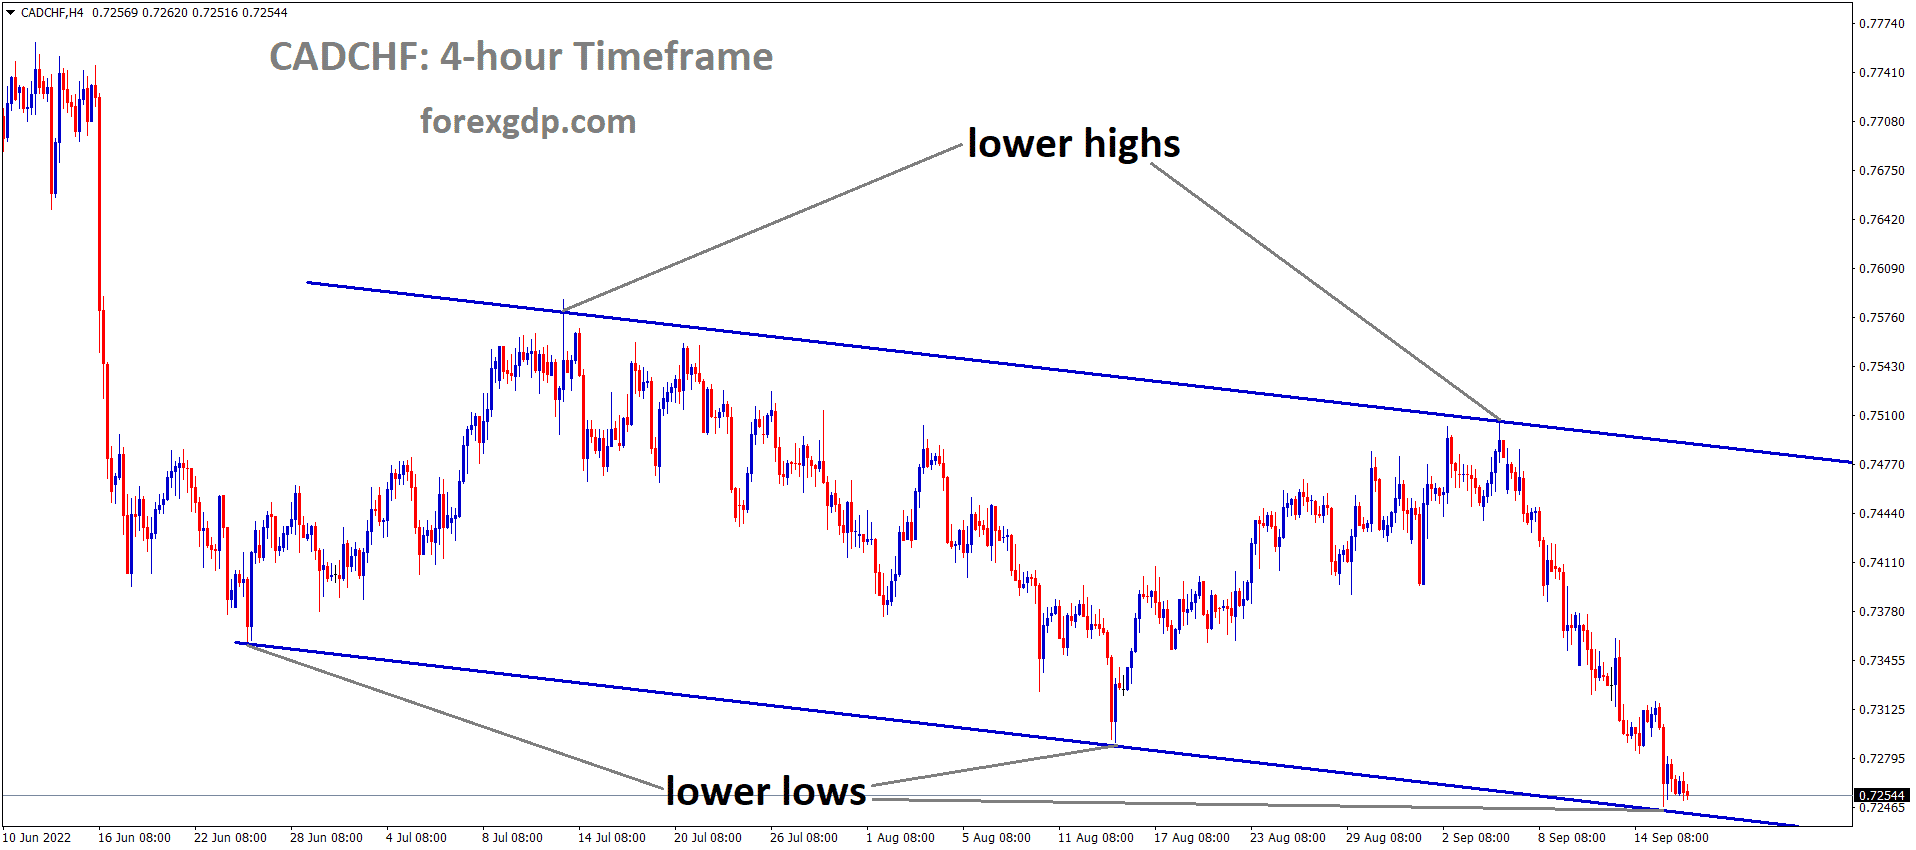 CADCHF is moving in the Descending channel and the market has reached the lower low area of the channel